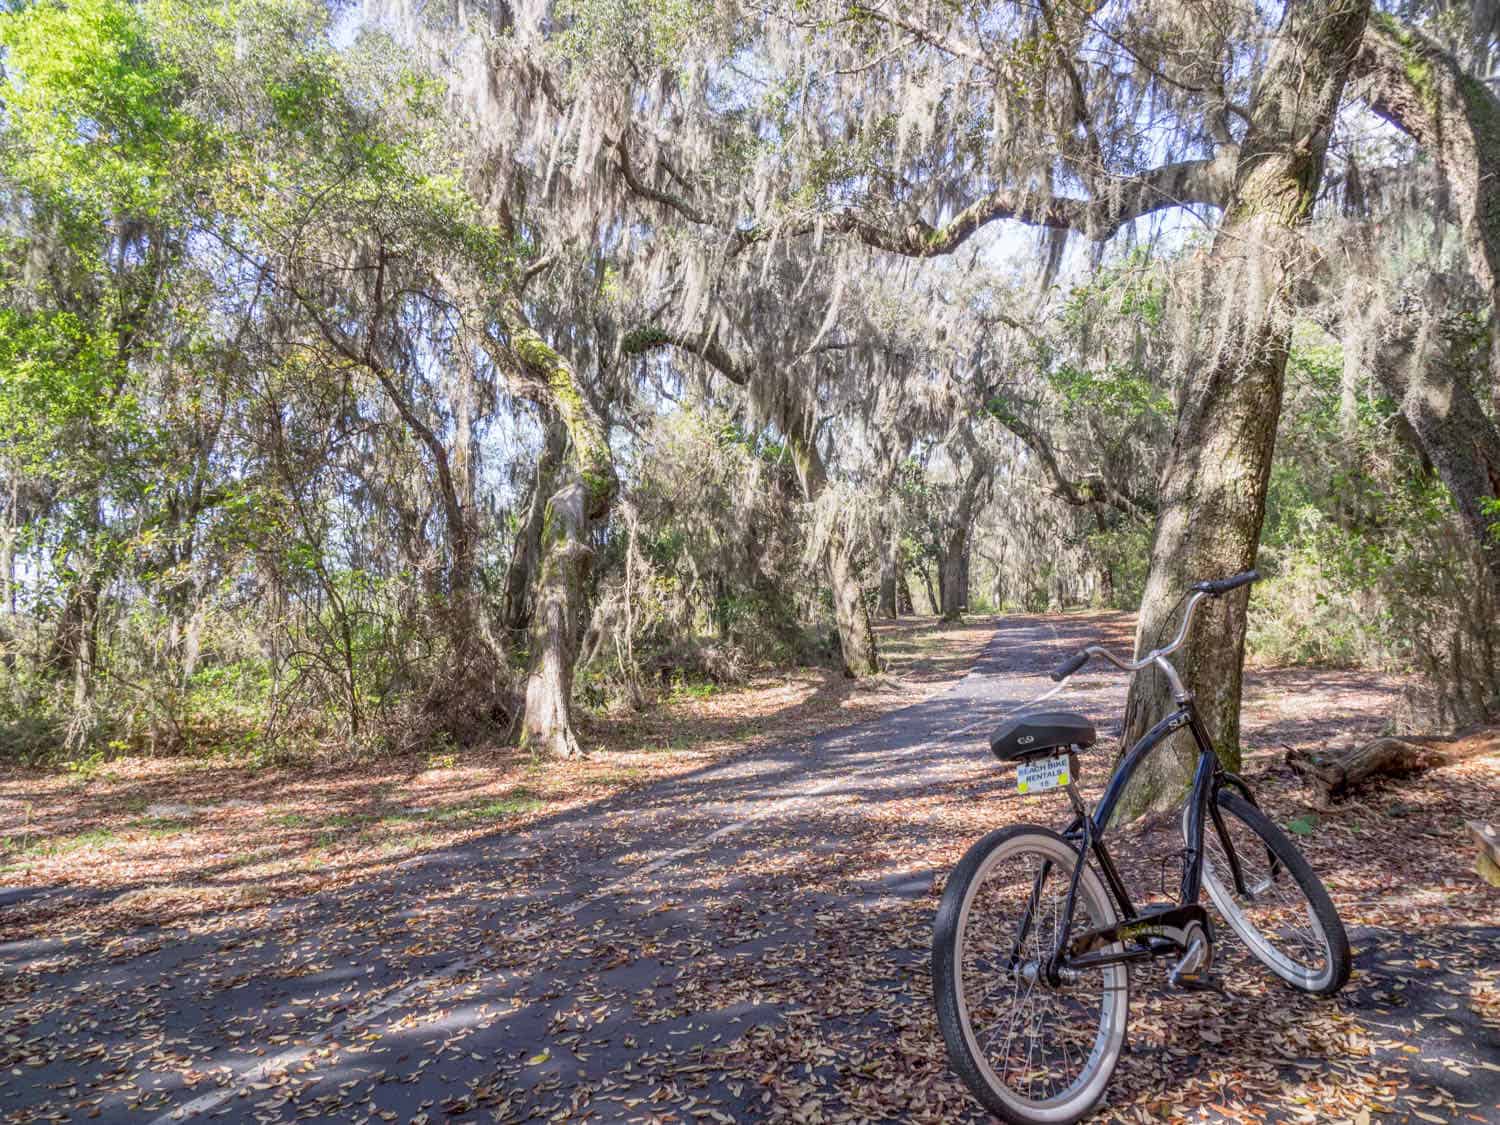 Bicycle next to a tree on a forested bike path